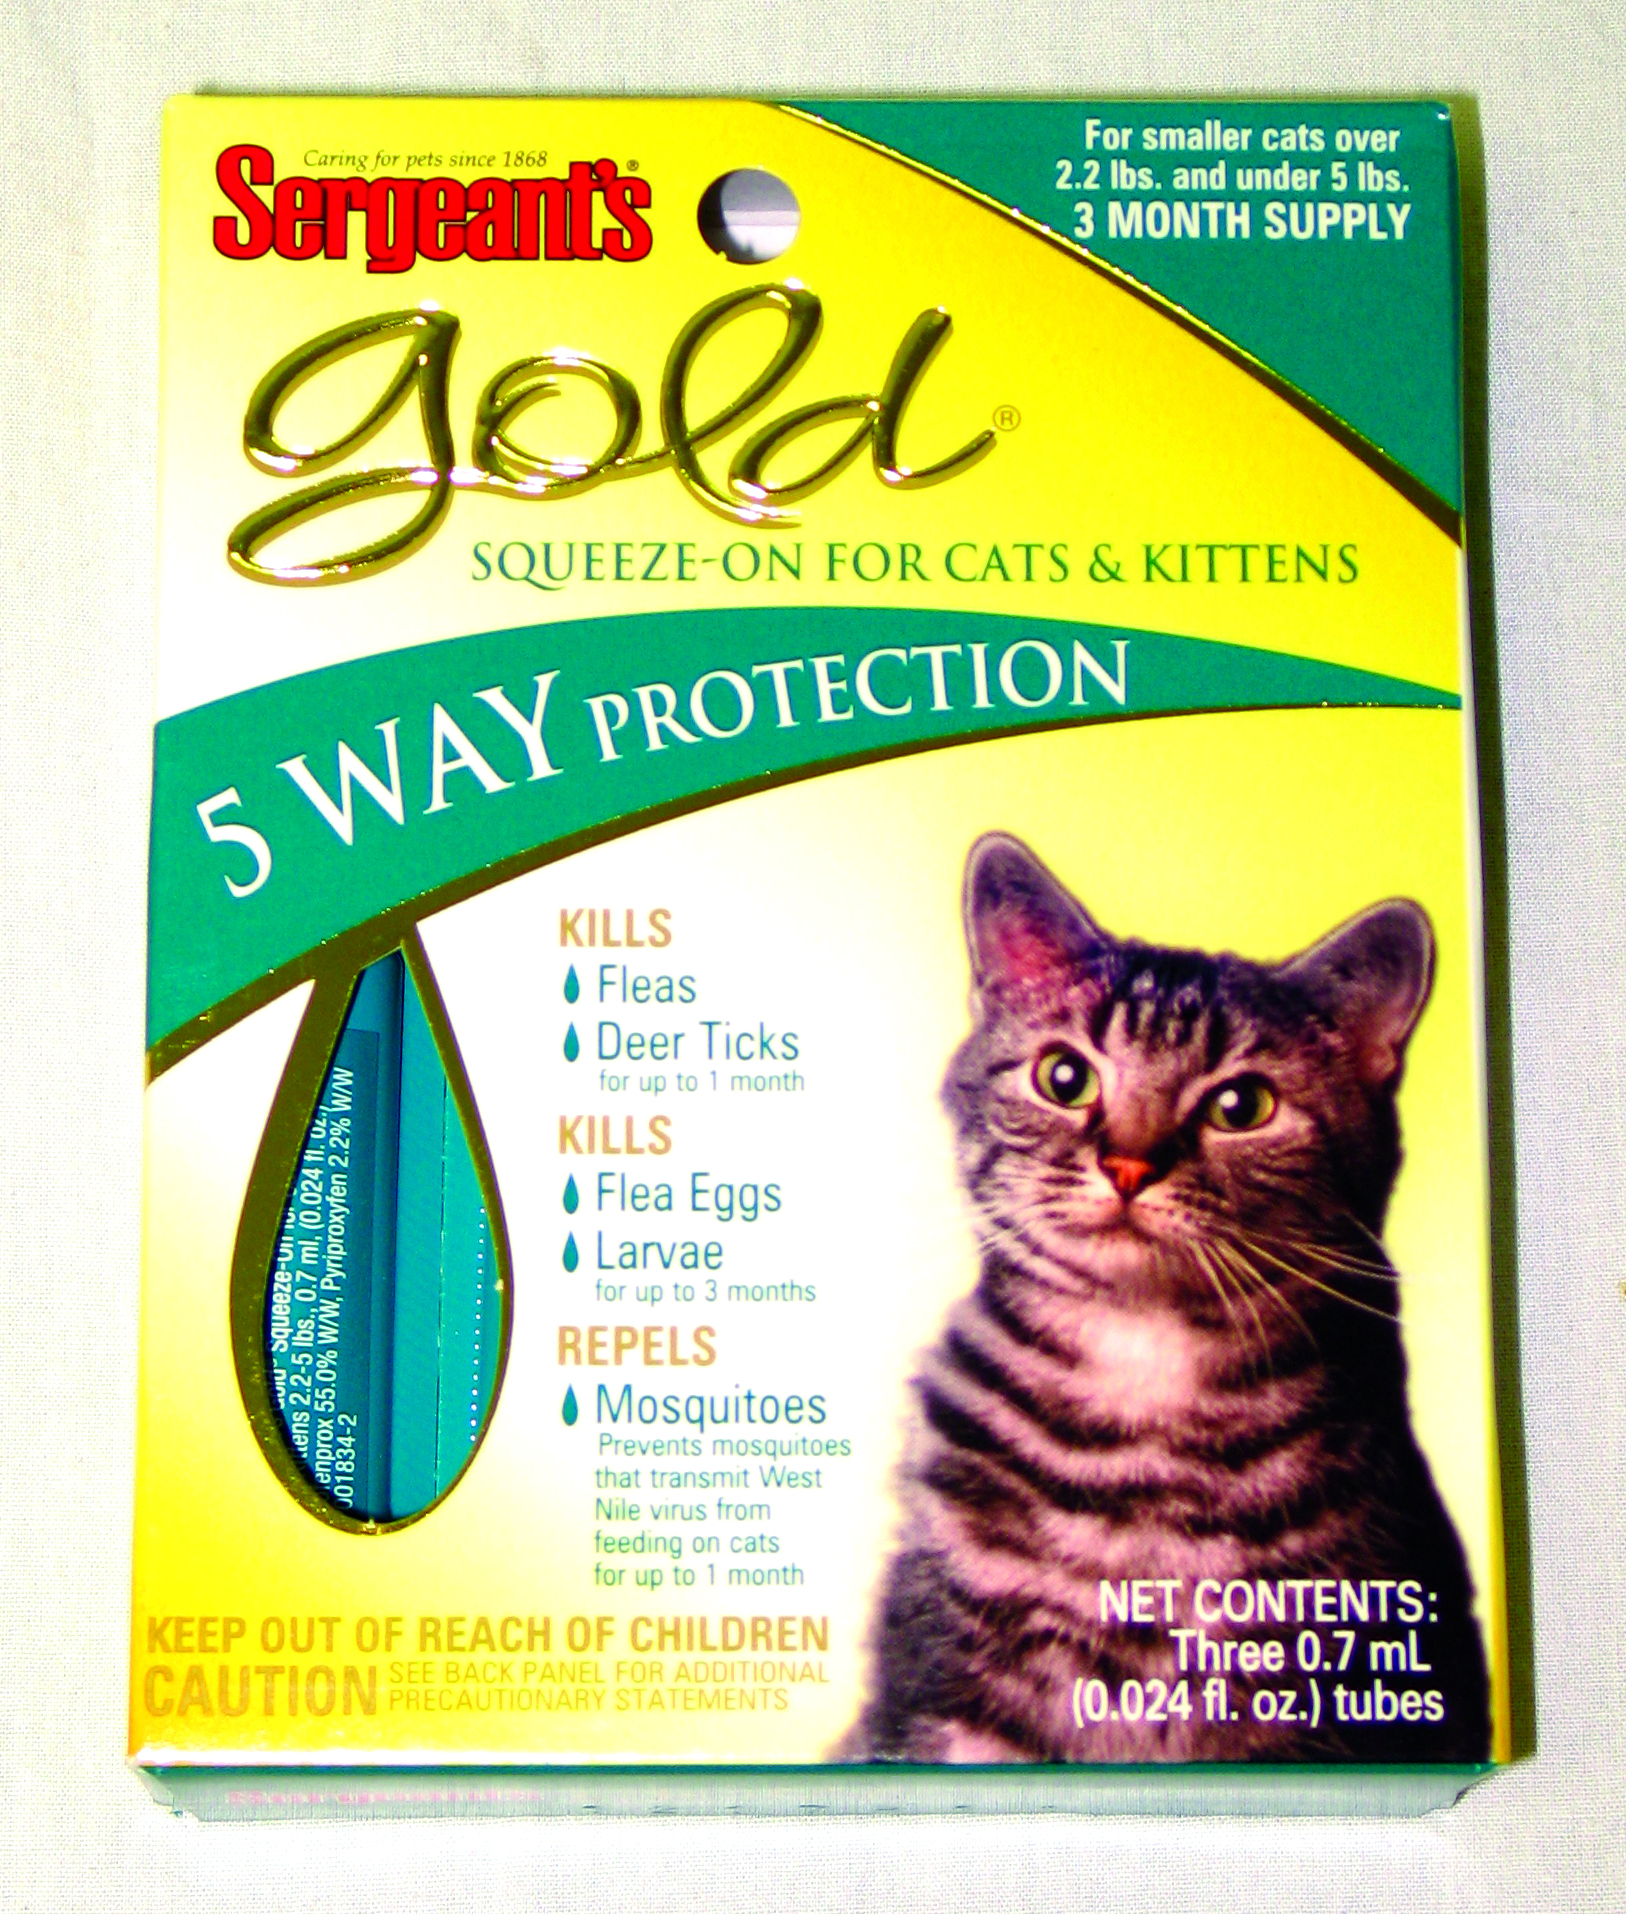 GOLD SQUEEZE-ON FOR CATS